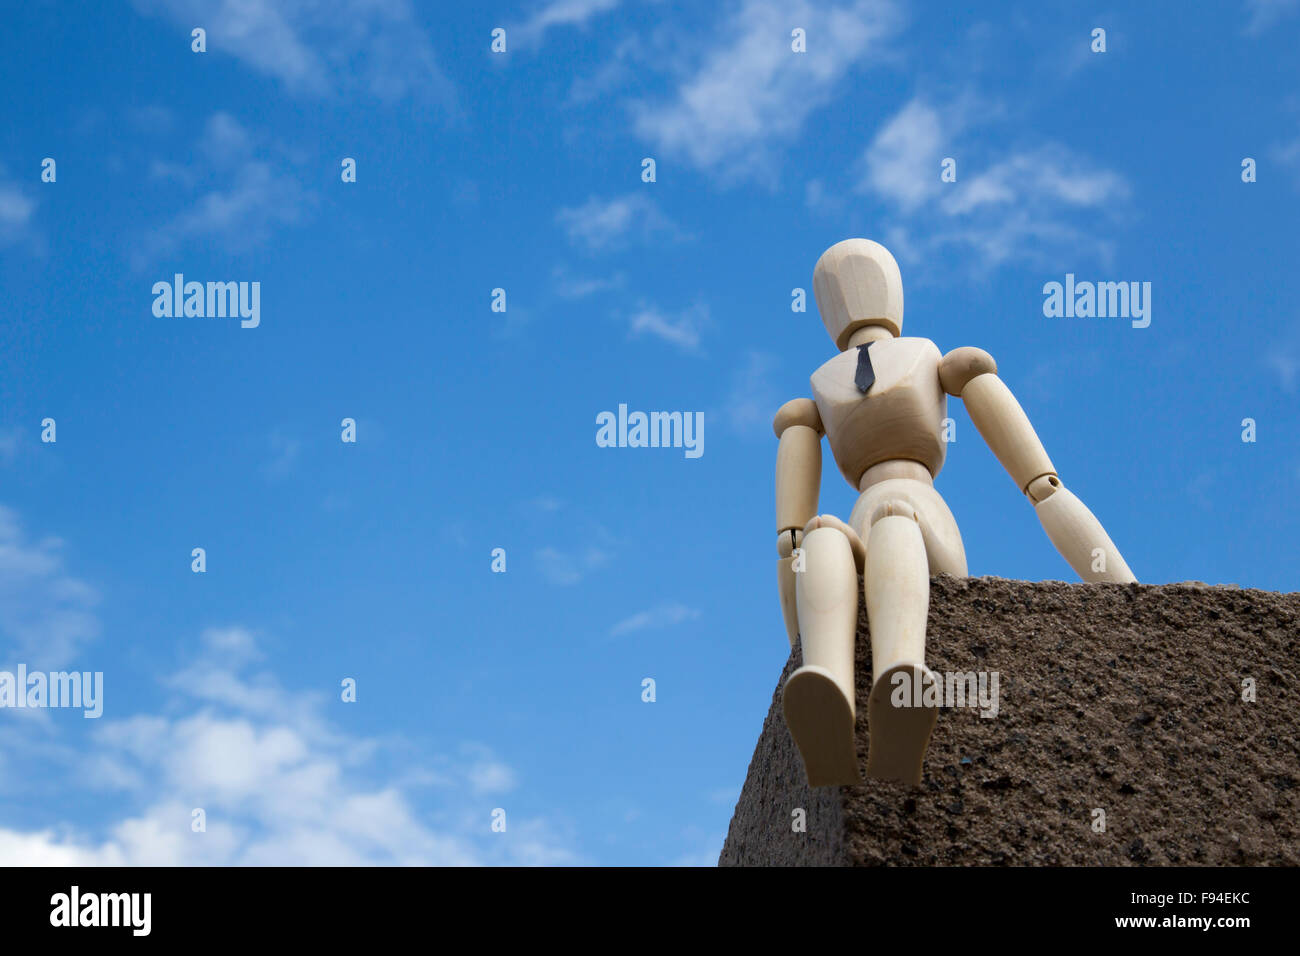 Businessman puppet on the edge of a building in front of blue sky Stock Photo